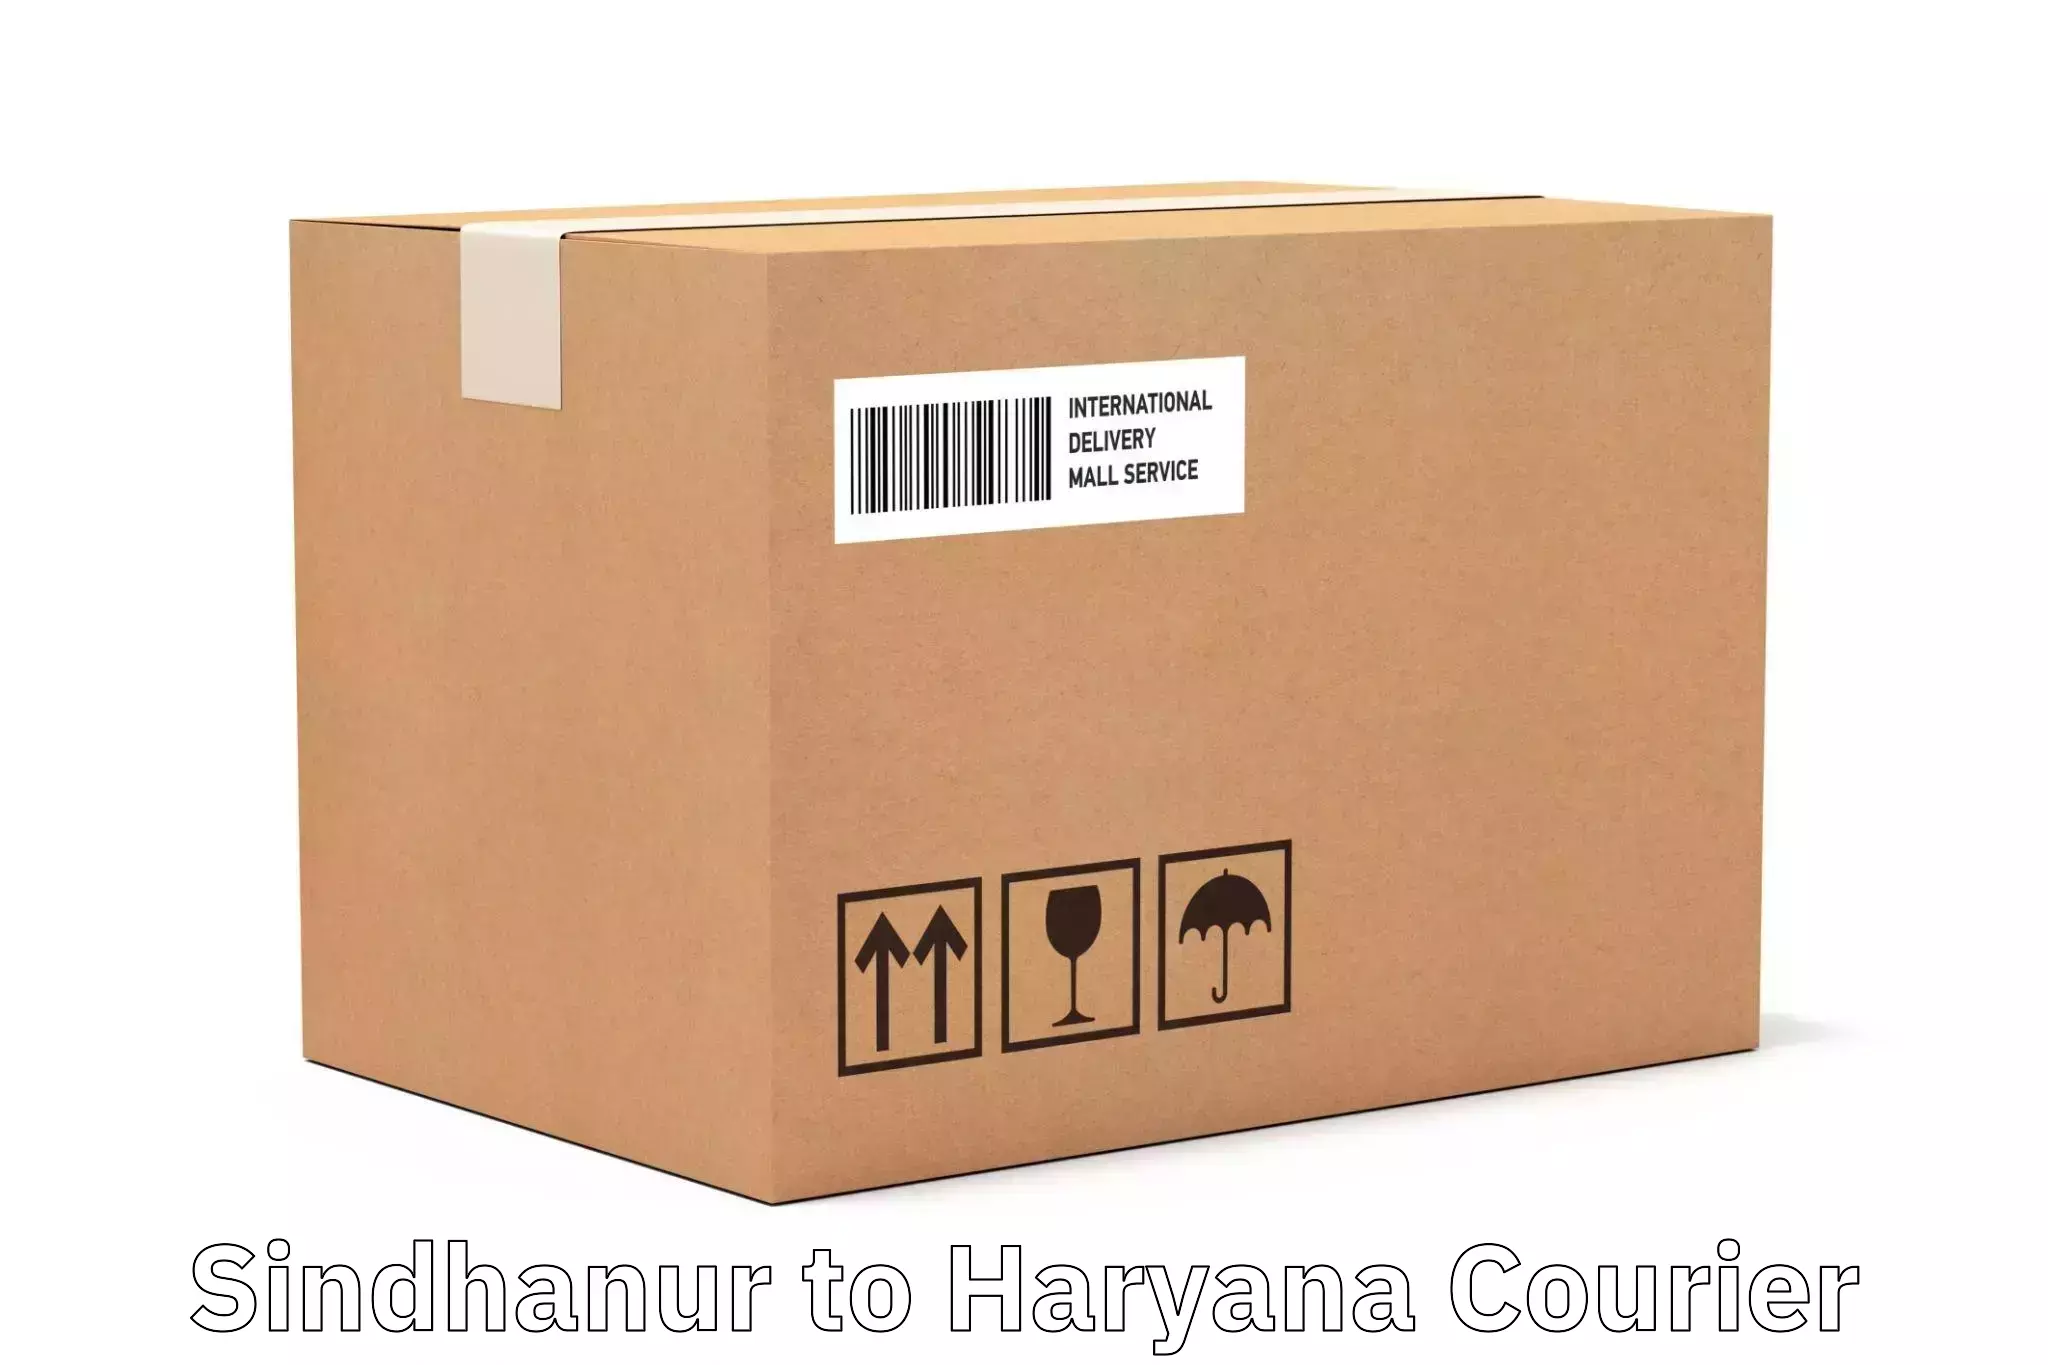 Courier service comparison Sindhanur to Chaudhary Charan Singh Haryana Agricultural University Hisar